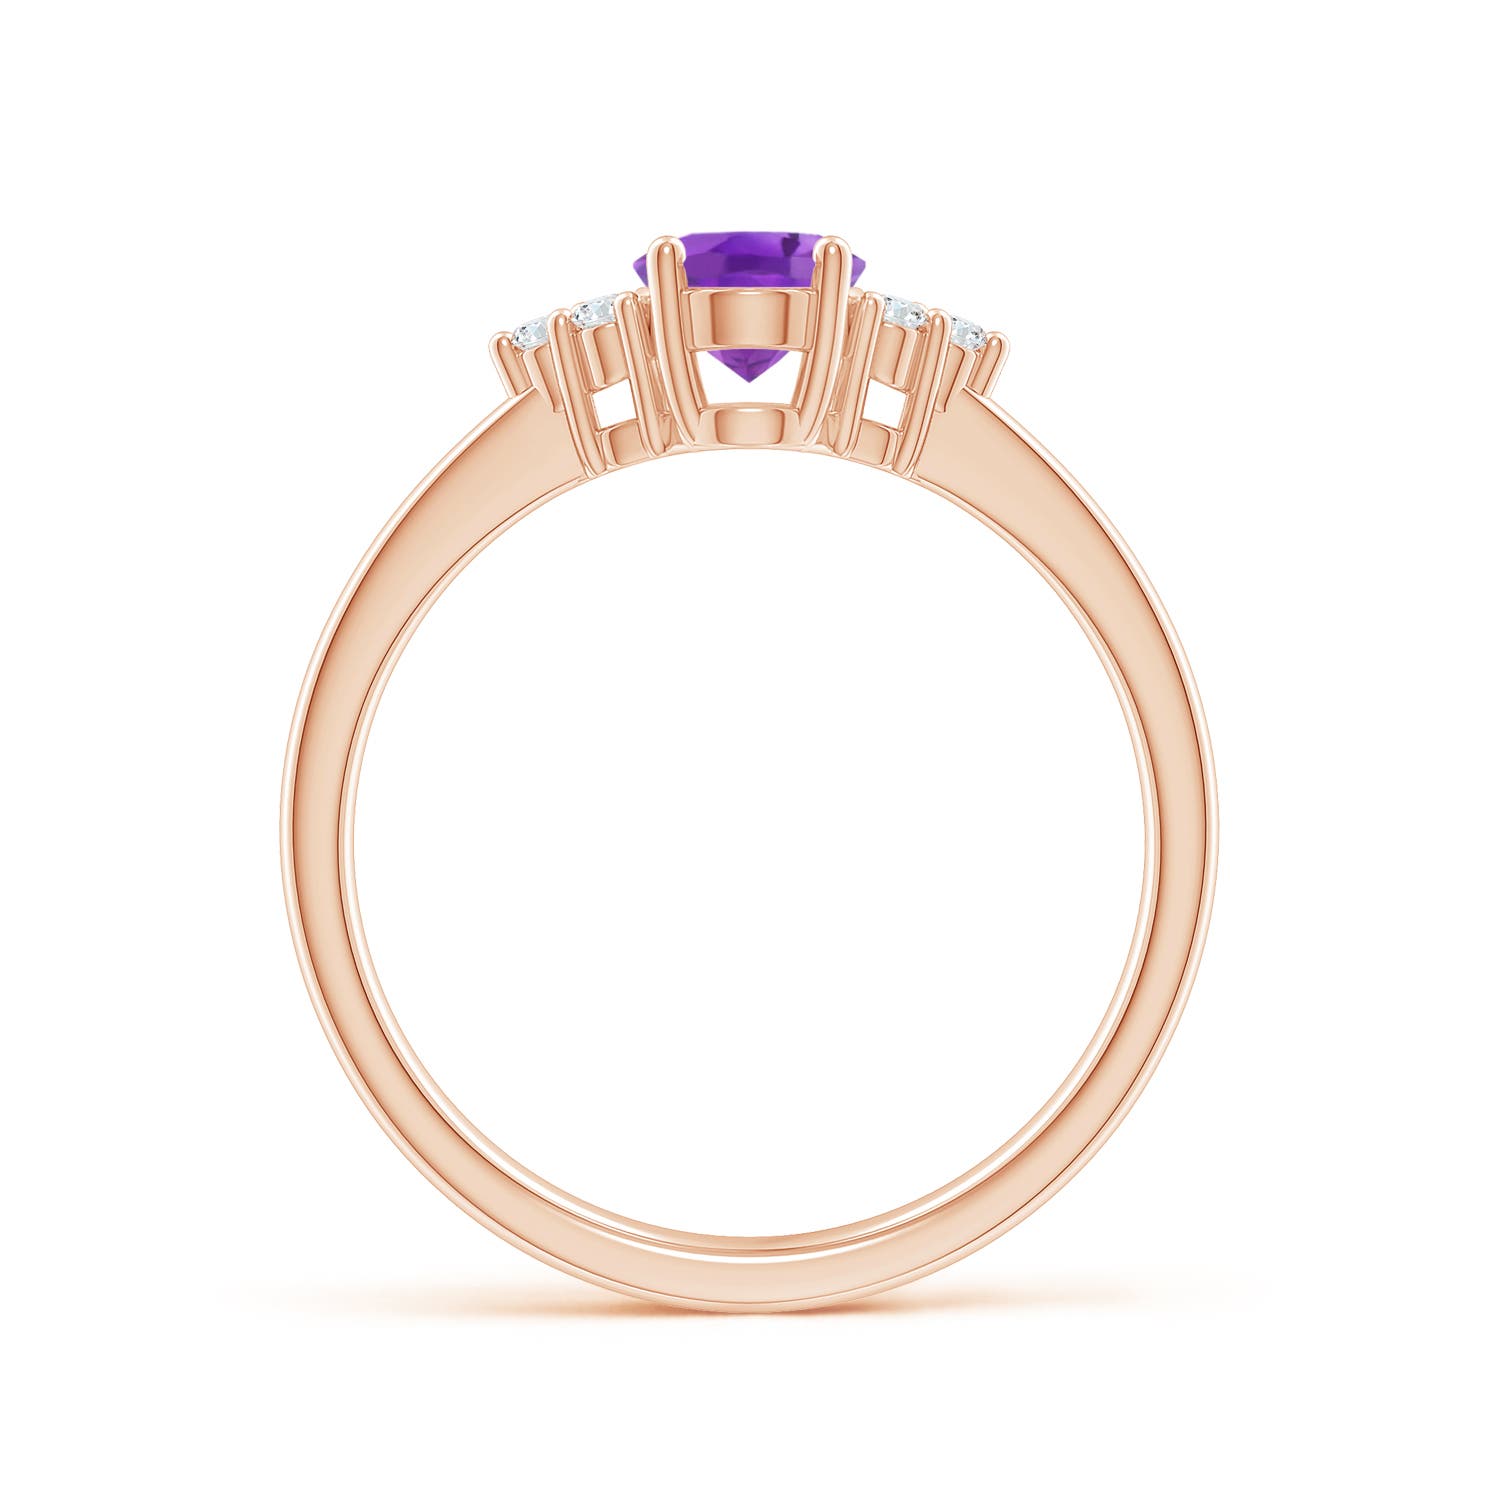 AA - Amethyst / 0.78 CT / 14 KT Rose Gold